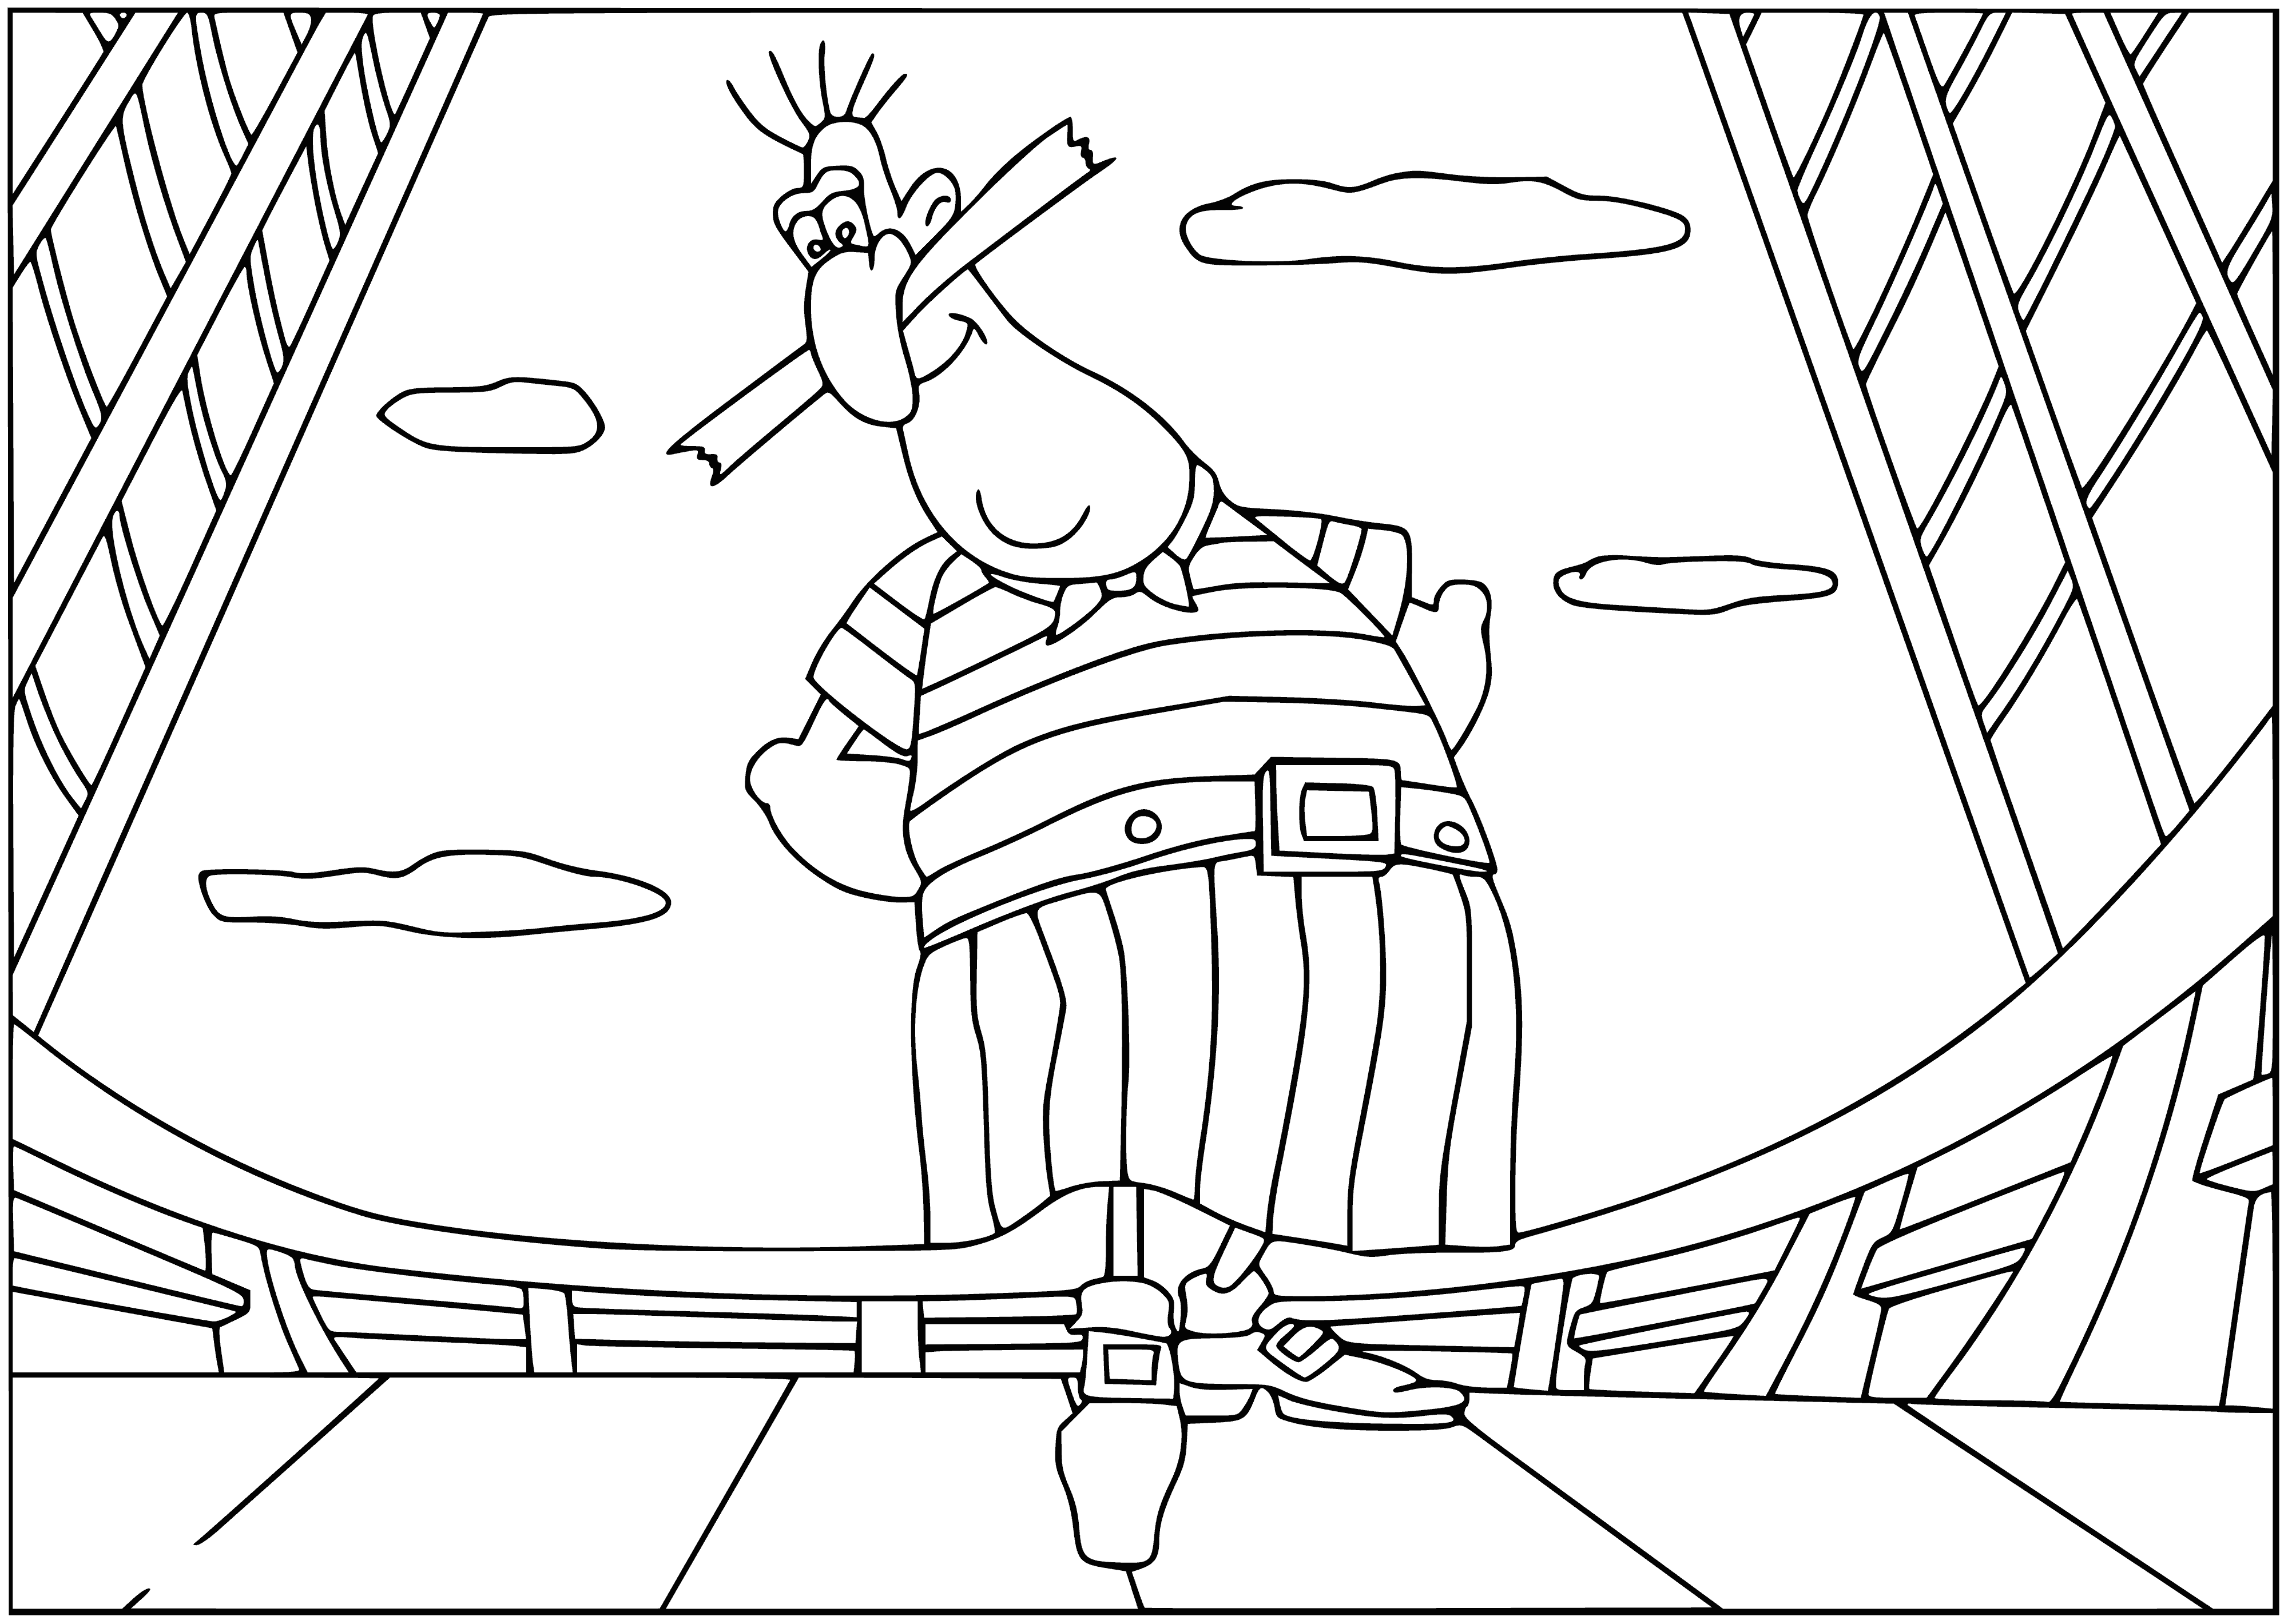 coloring page: Pirates search for treasure aboard a large ship; skull and crossbones flag waves above deck, treasue chest on board.